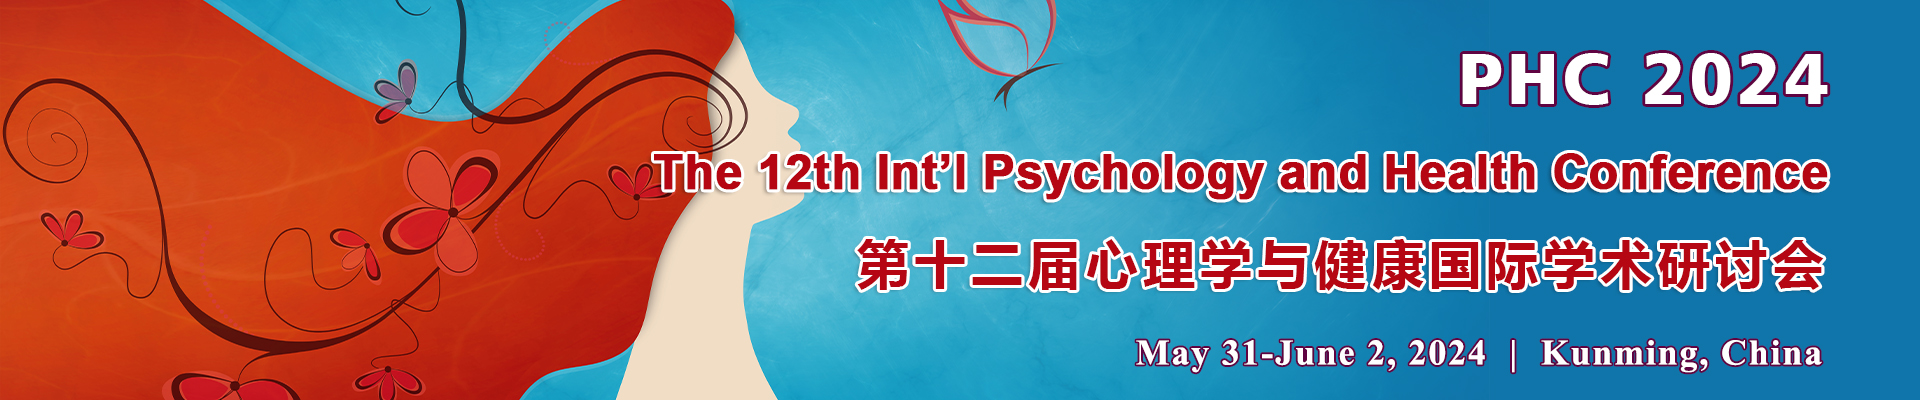 The 12th Int’l Psychology and Health Conference (PHC 2024)